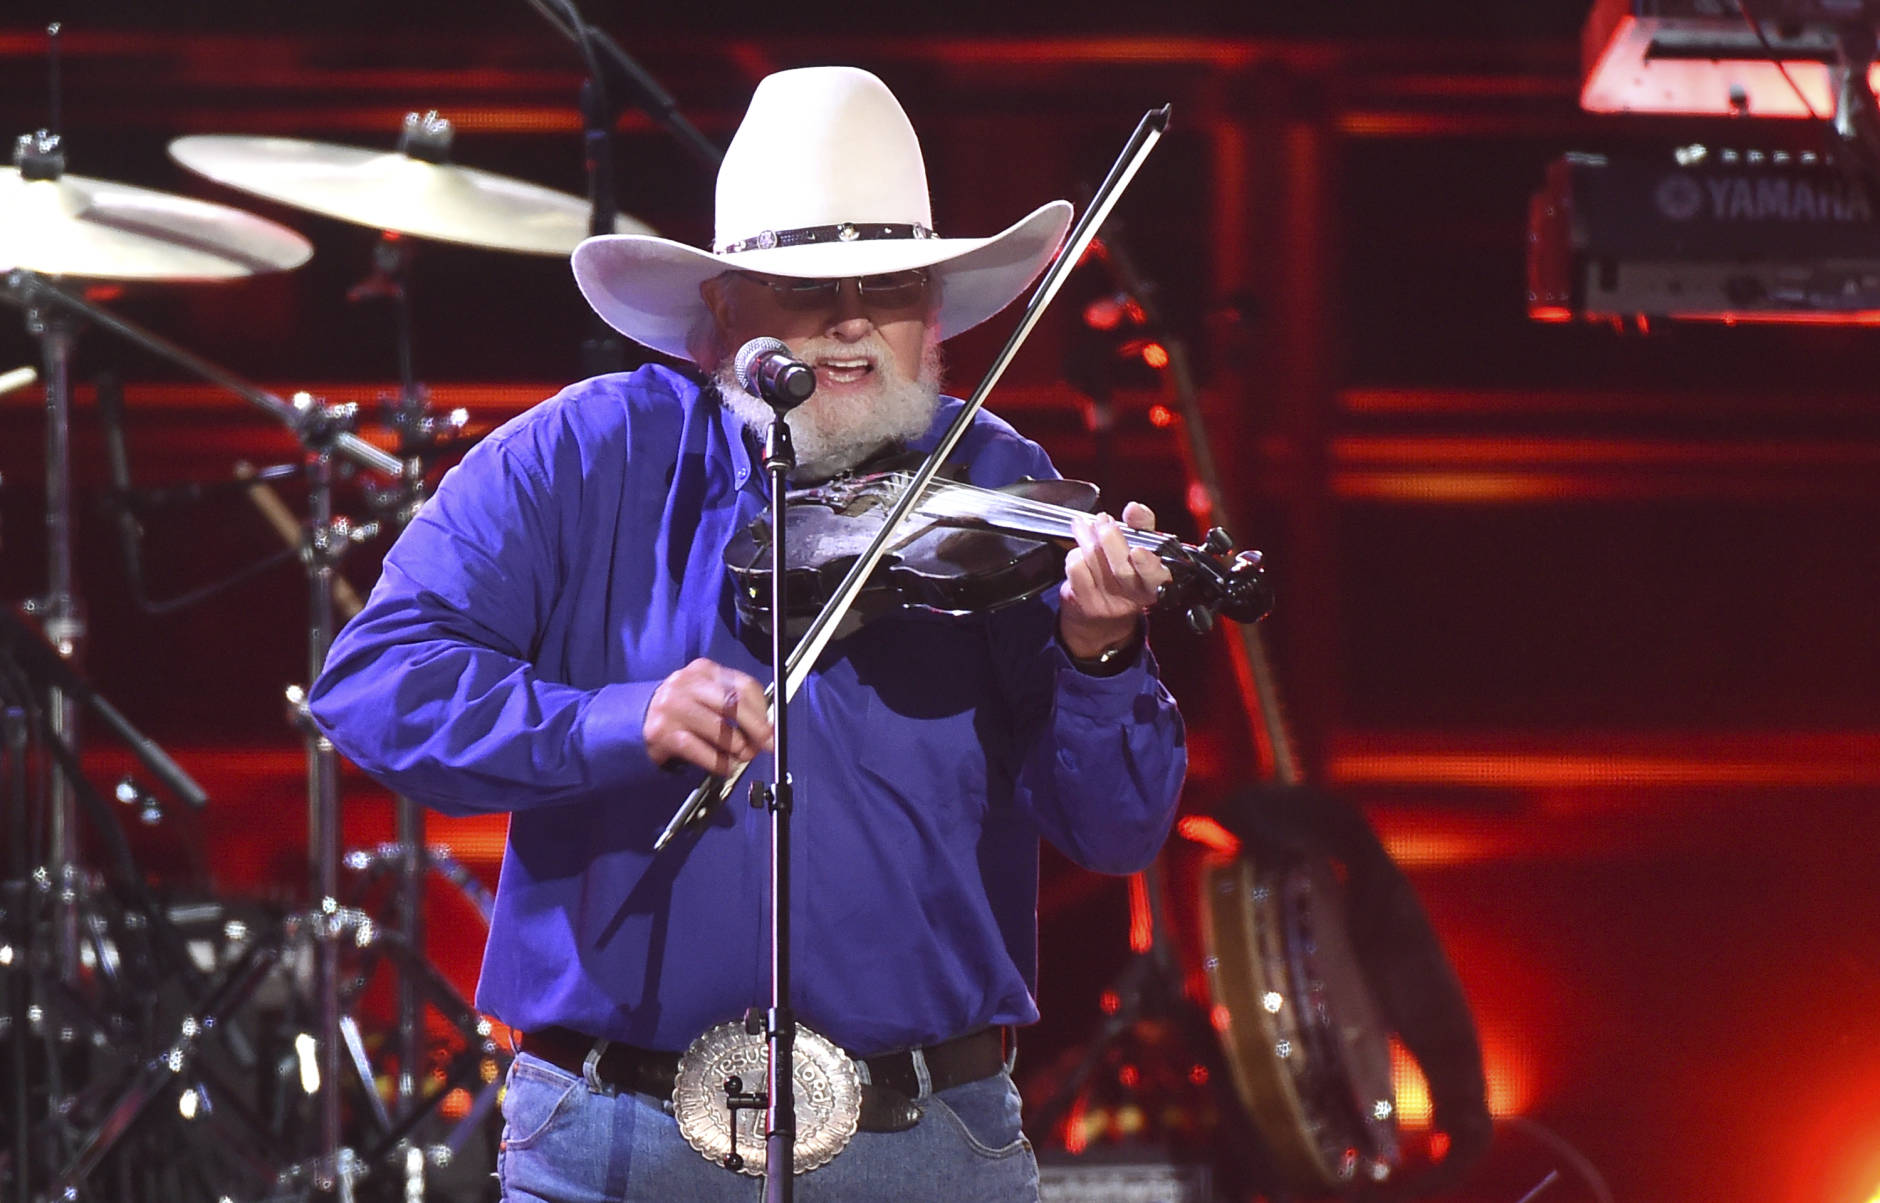 Charlie Daniels performs " The Devil Went Down To Georgia" at the 50th annual CMA Awards at the Bridgestone Arena on Wednesday, Nov. 2, 2016, in Nashville, Tenn. (Photo by Charles Sykes/Invision/AP)